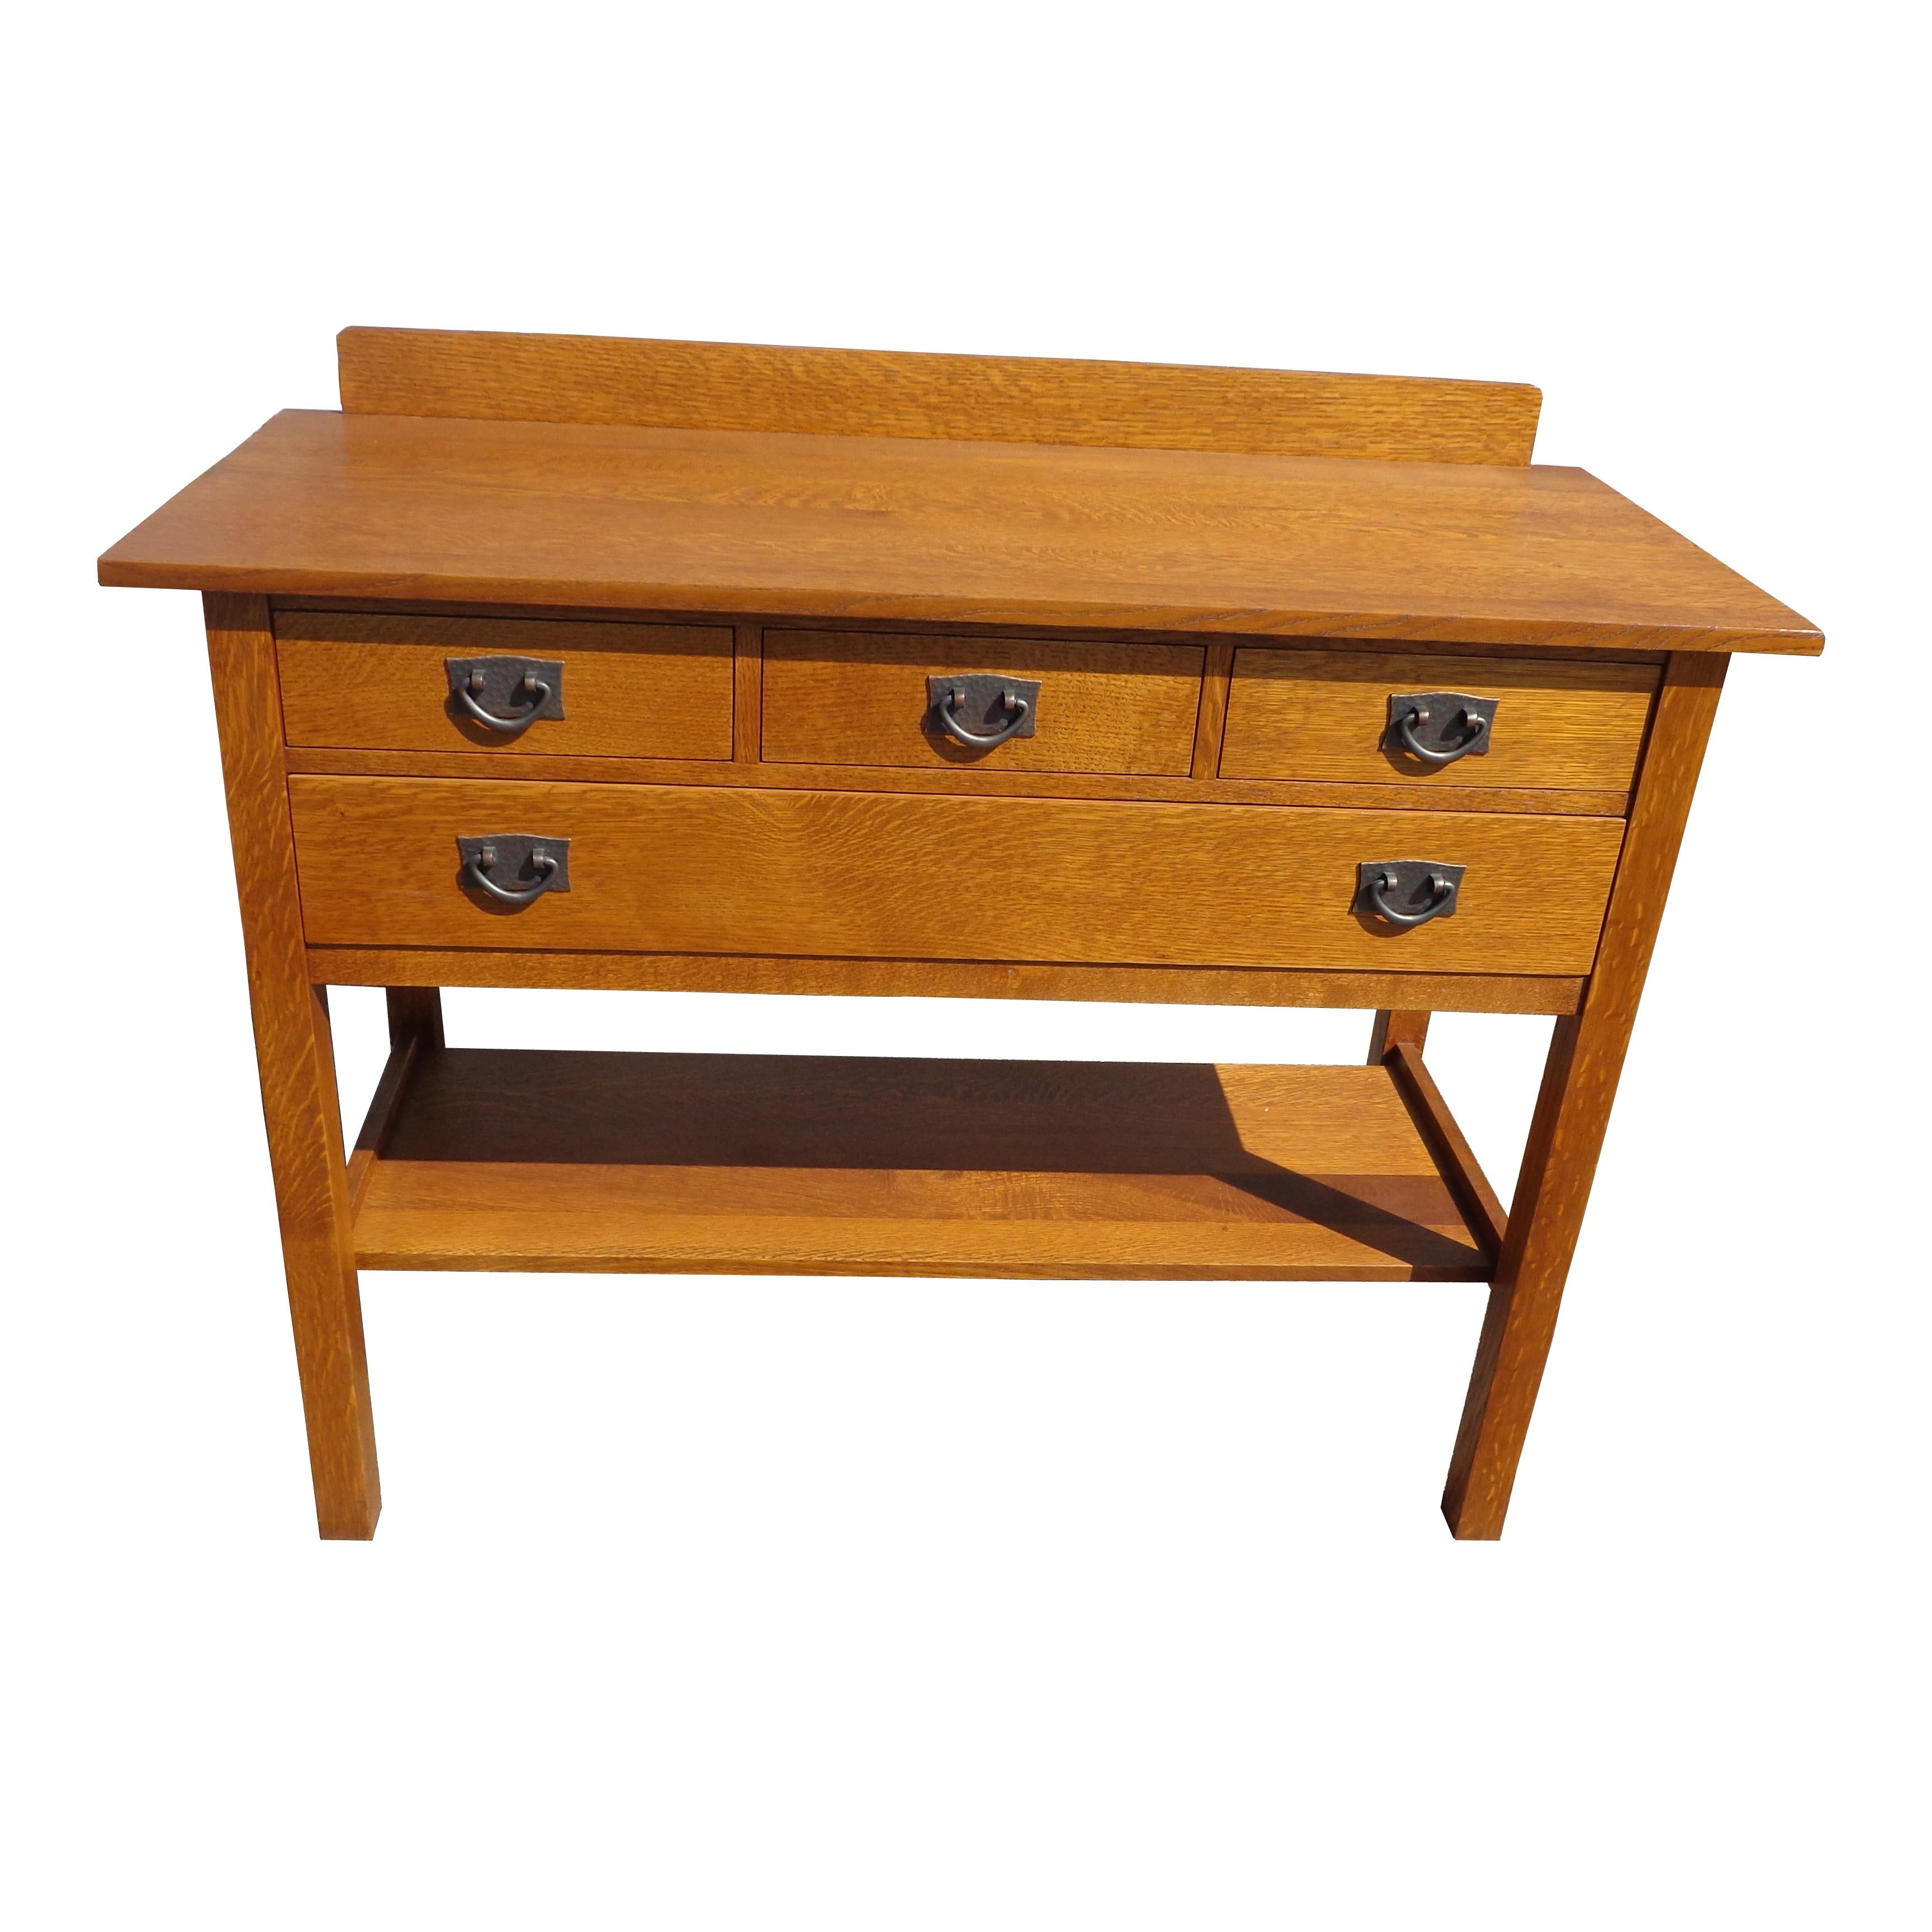 Stickley buffet side board W1209

Part of the reissued Mission collection late 20th century.

Gustav Stickley cherry four drawer sideboard or dresser. Overhanging top, wide lower shelf, and slightly tapered legs. The piece is signed with a branding